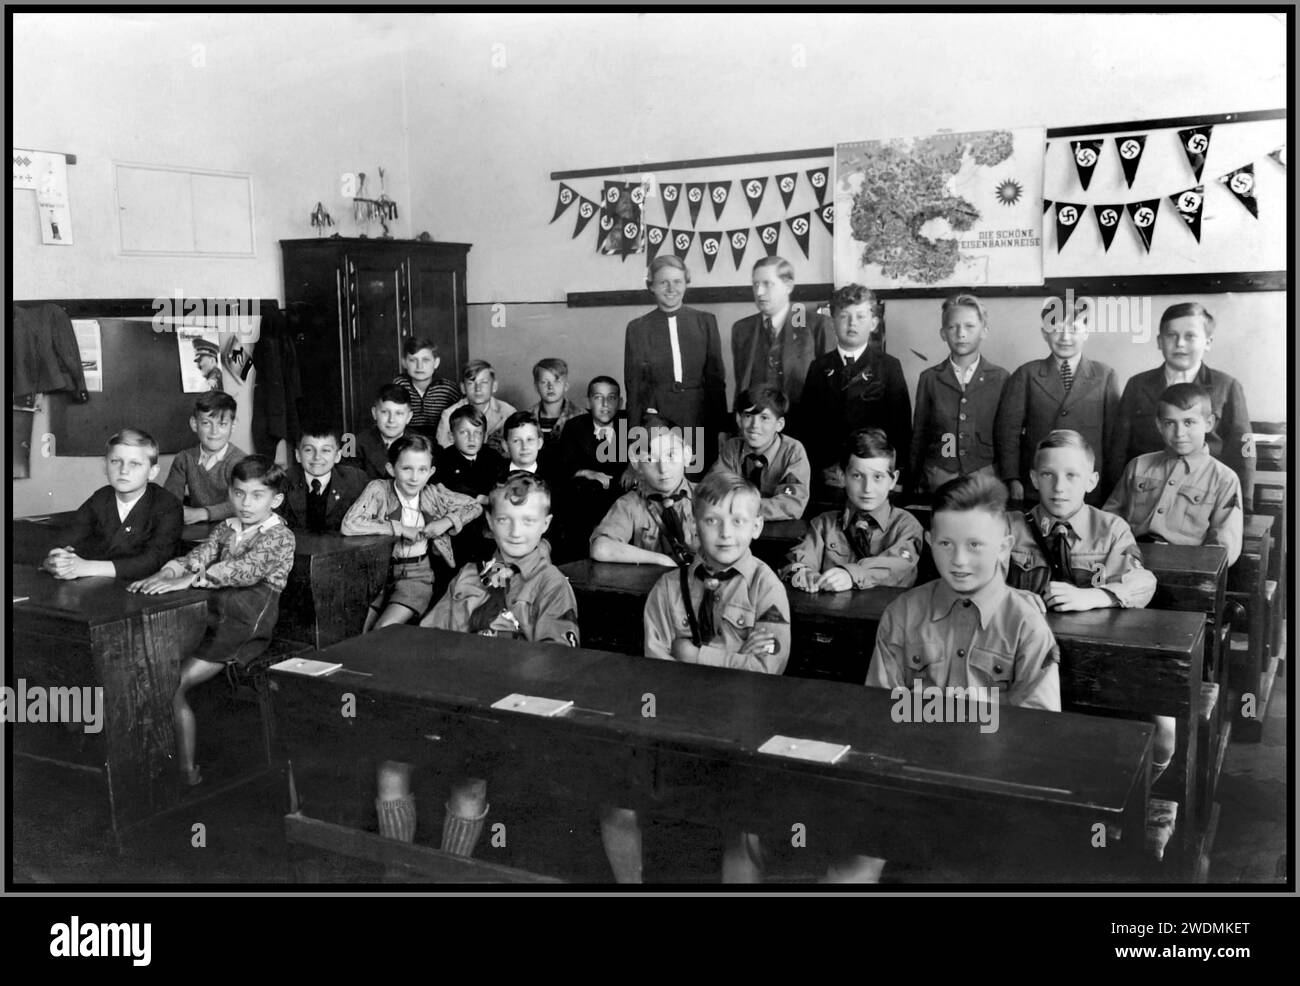 1930s Nazi Junior School with Hitler Youth Hitler Jugend boys in uniorm in the classroom, with swastika flags behind, radicalisation in school education 1930s  Nazi Germany Stock Photo